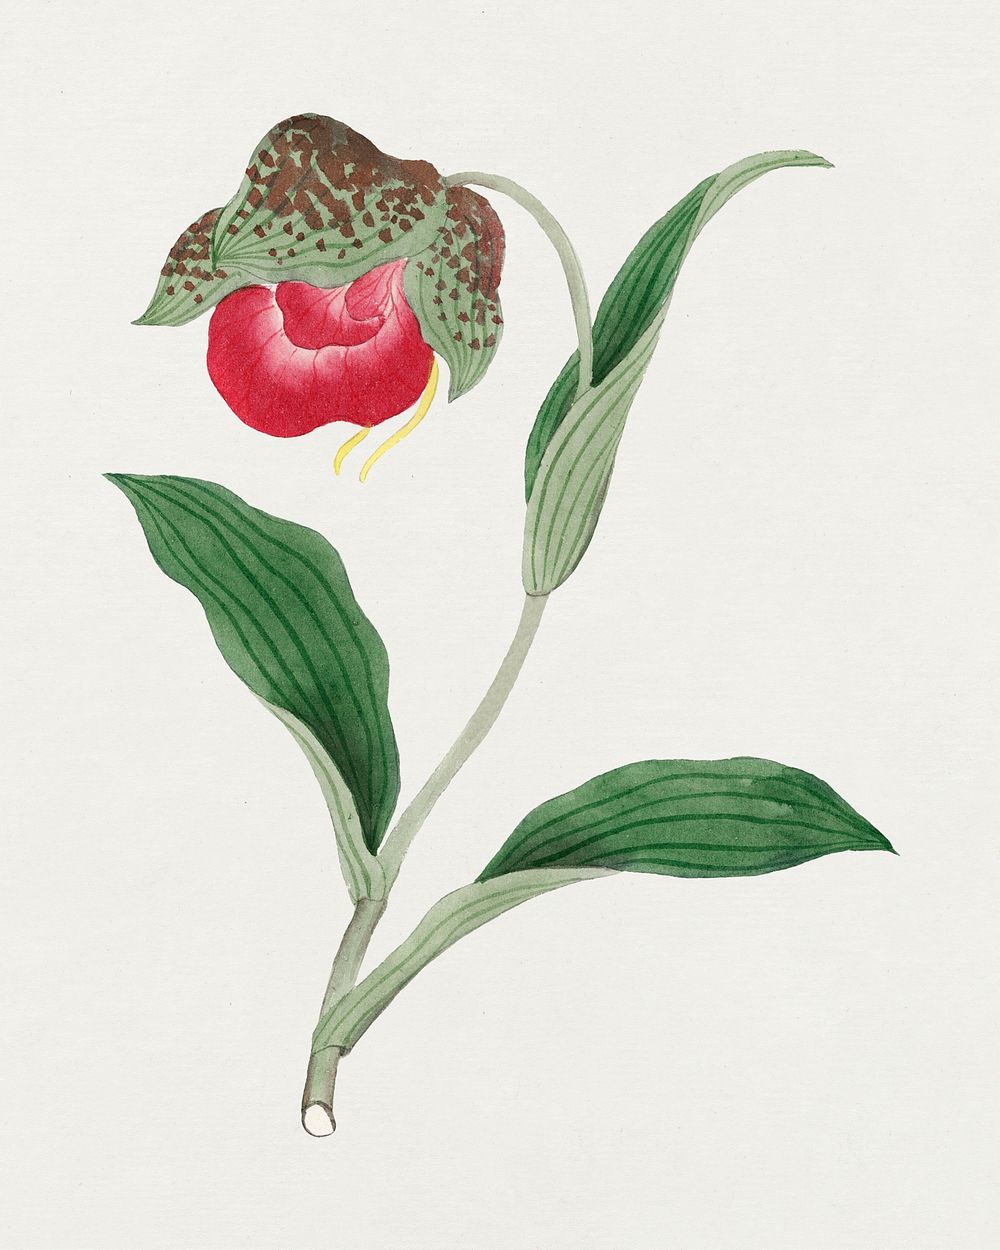 Cypripedium flower psd classic style, vintage Japanese art remix from the David Murray collection